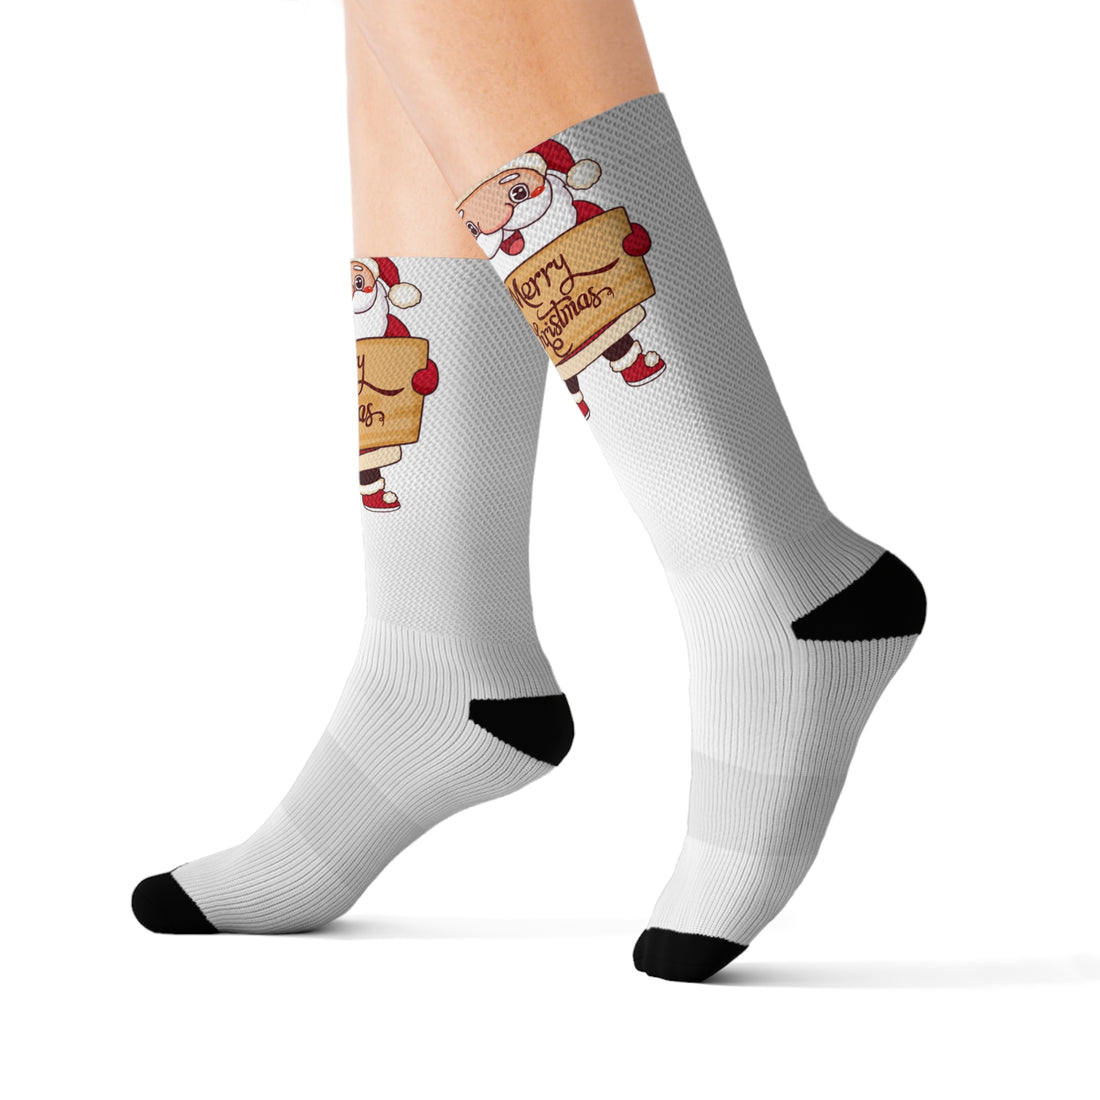 Merry Christmas socks Home-clothes-jewelry